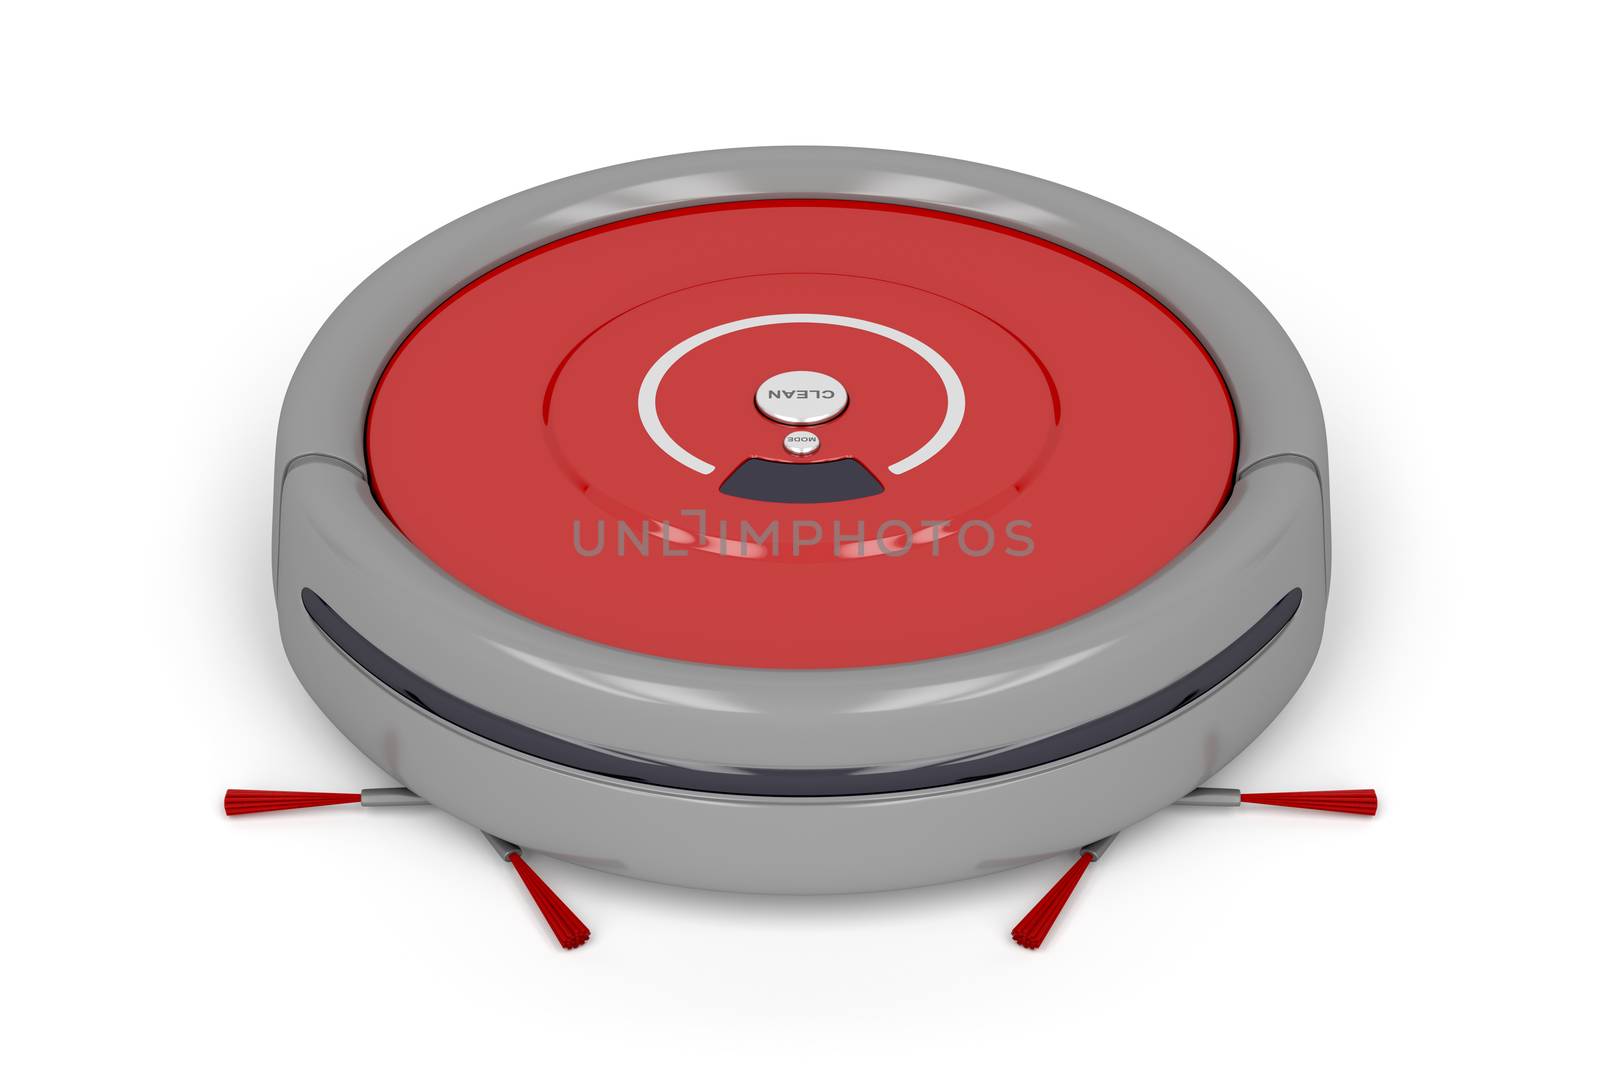 Robot vacuum cleaner on white background